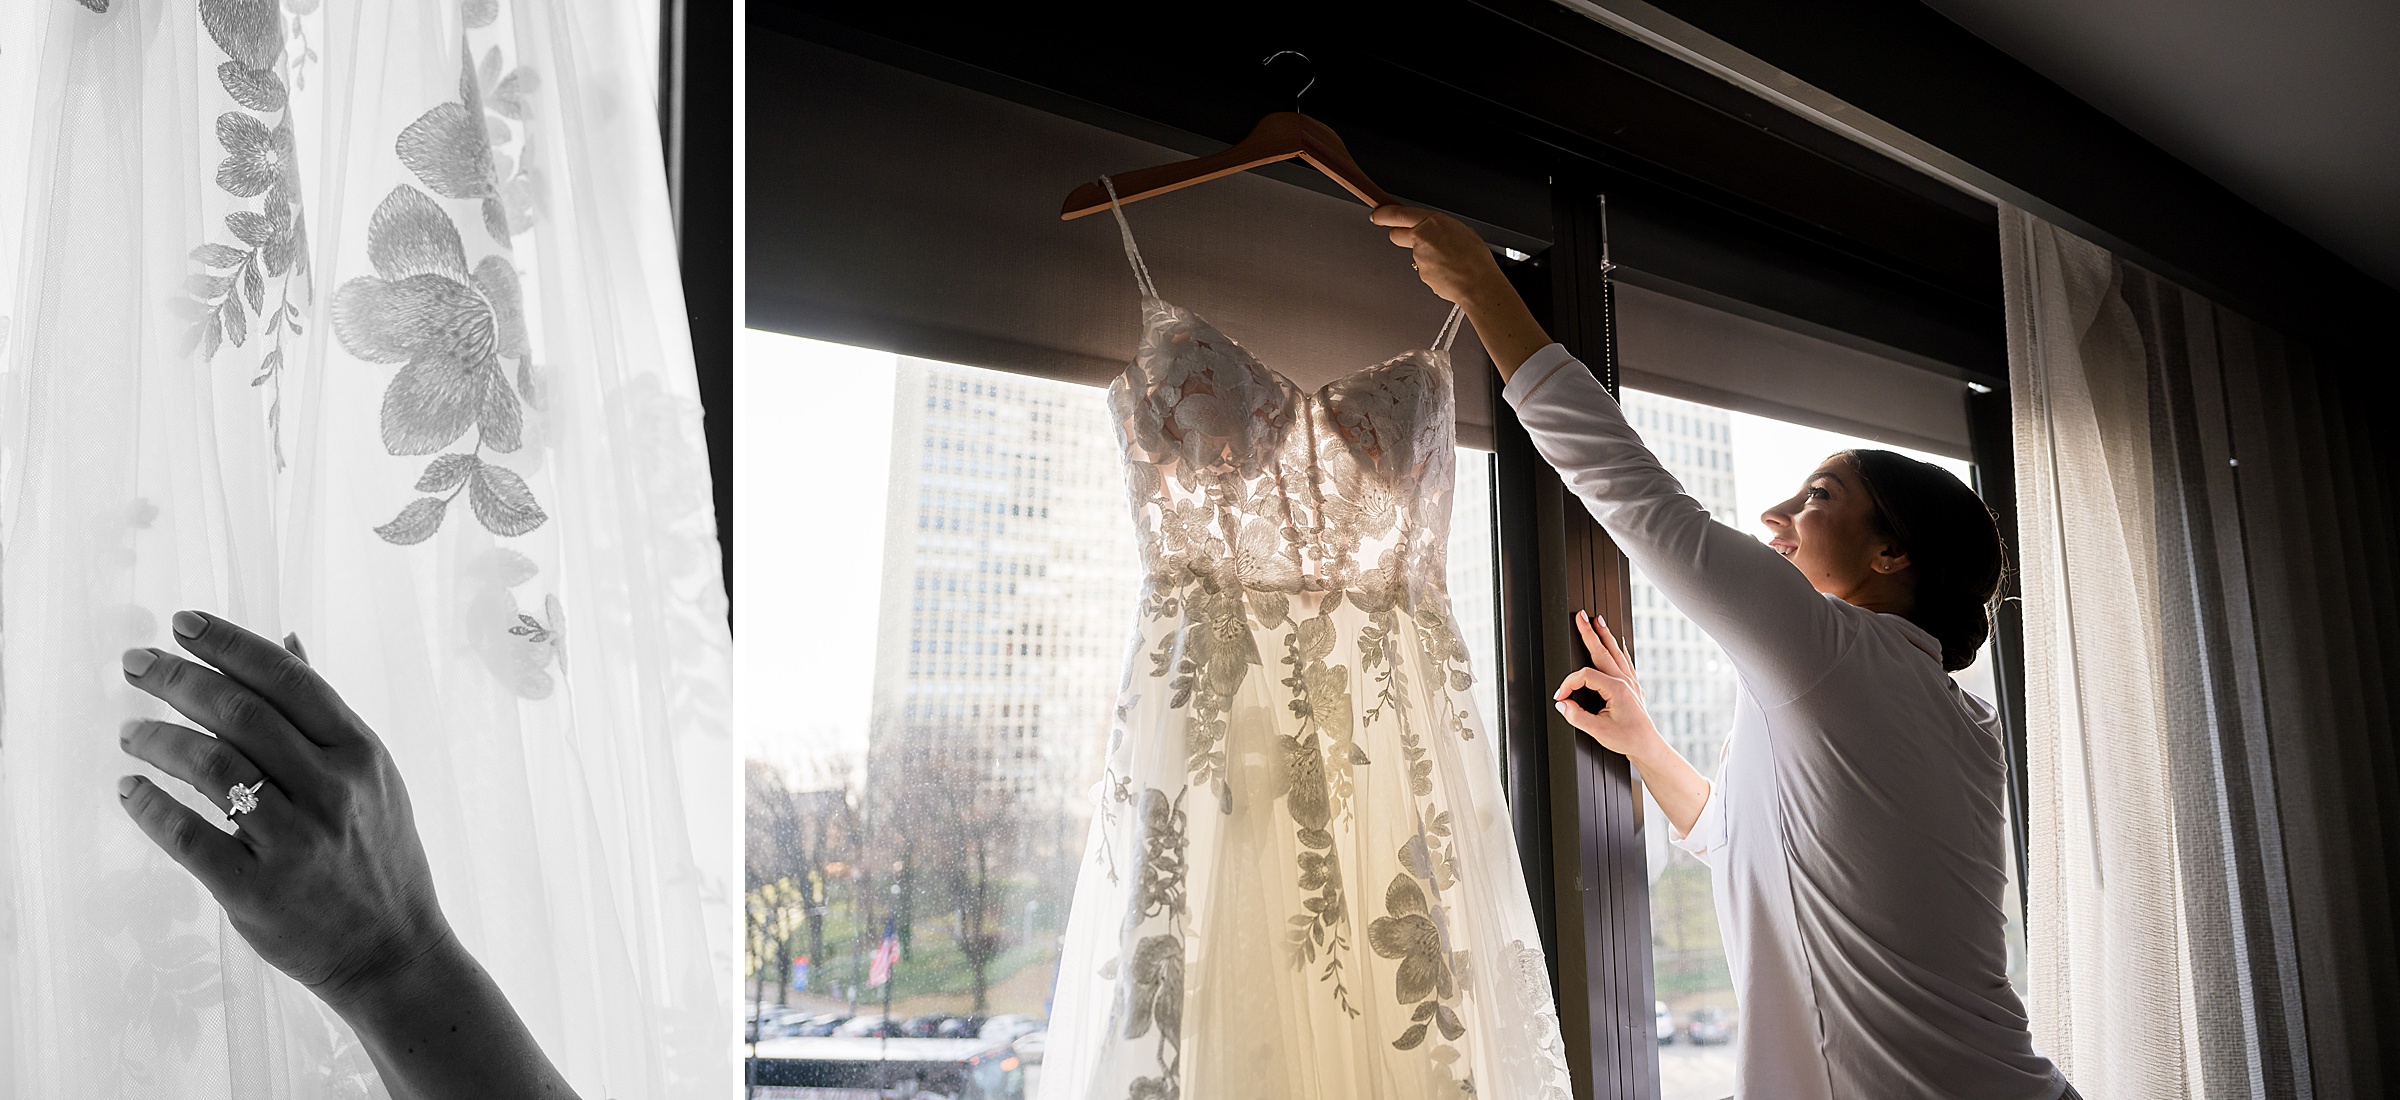 A woman is preparing her wedding dress for the Lilah Events.